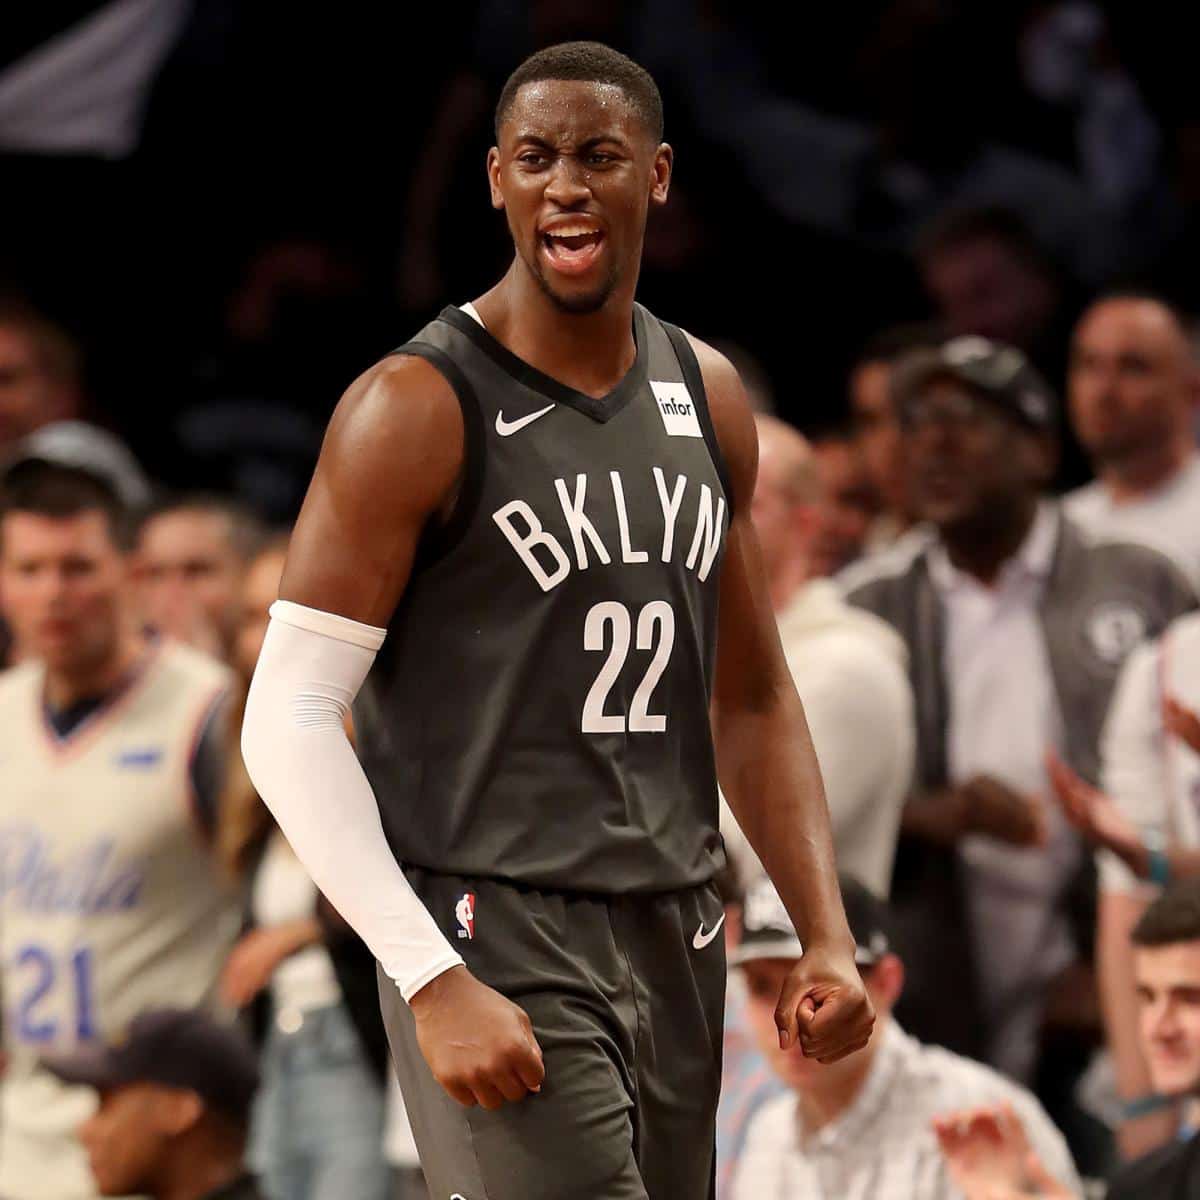 Caris LeVert returns with a bang on the court